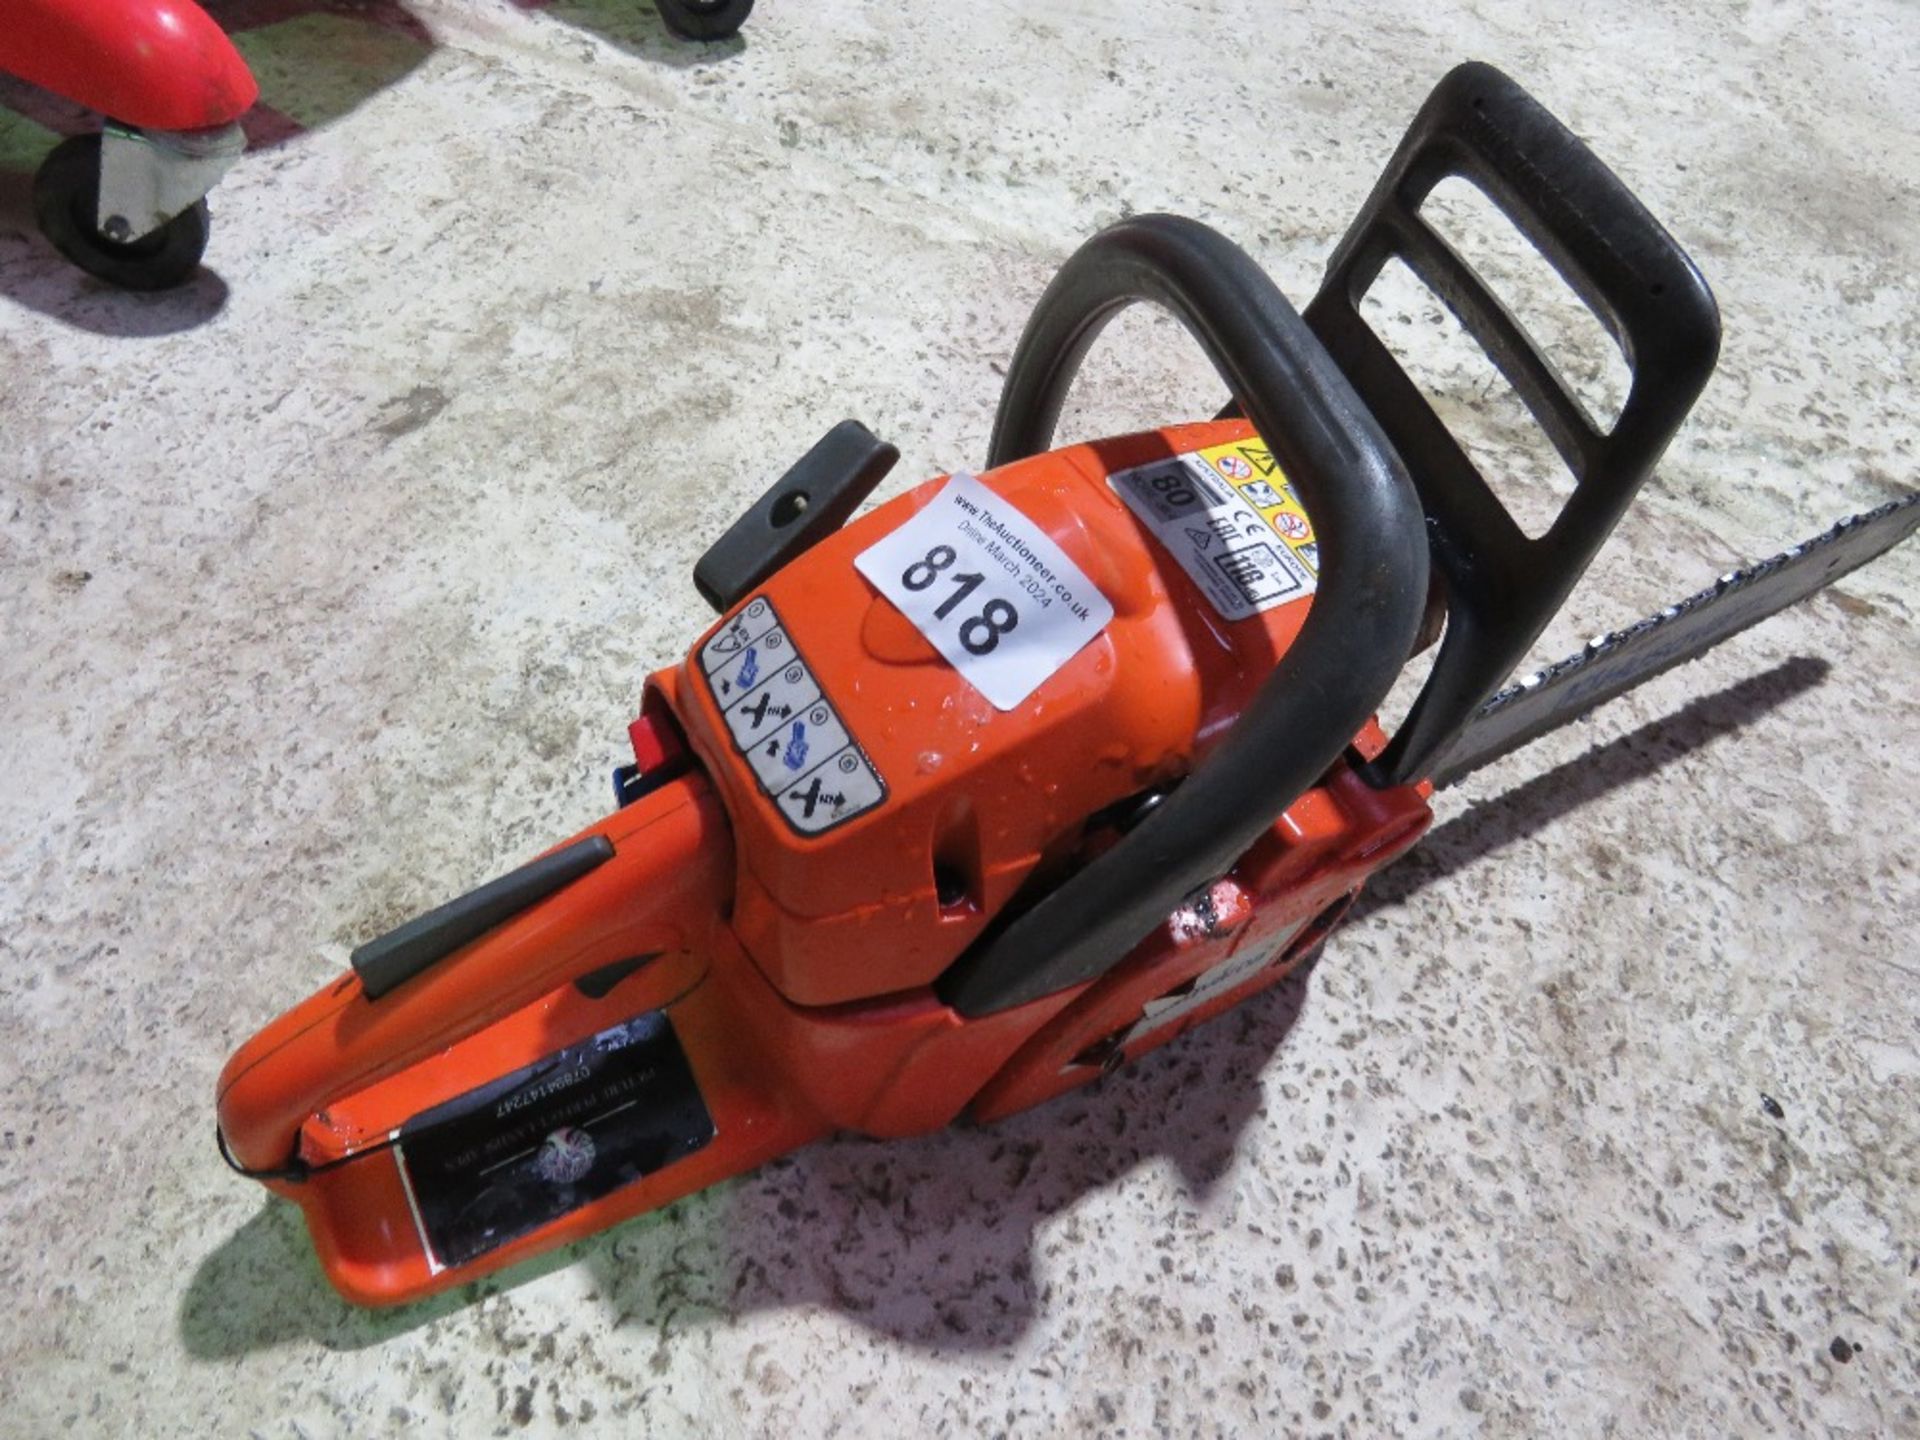 HUSQVARNA 120 PETROL CHAINSAW.....THIS LOT IS SOLD UNDER THE AUCTIONEERS MARGIN SCHEME, THEREFORE NO - Image 4 of 4